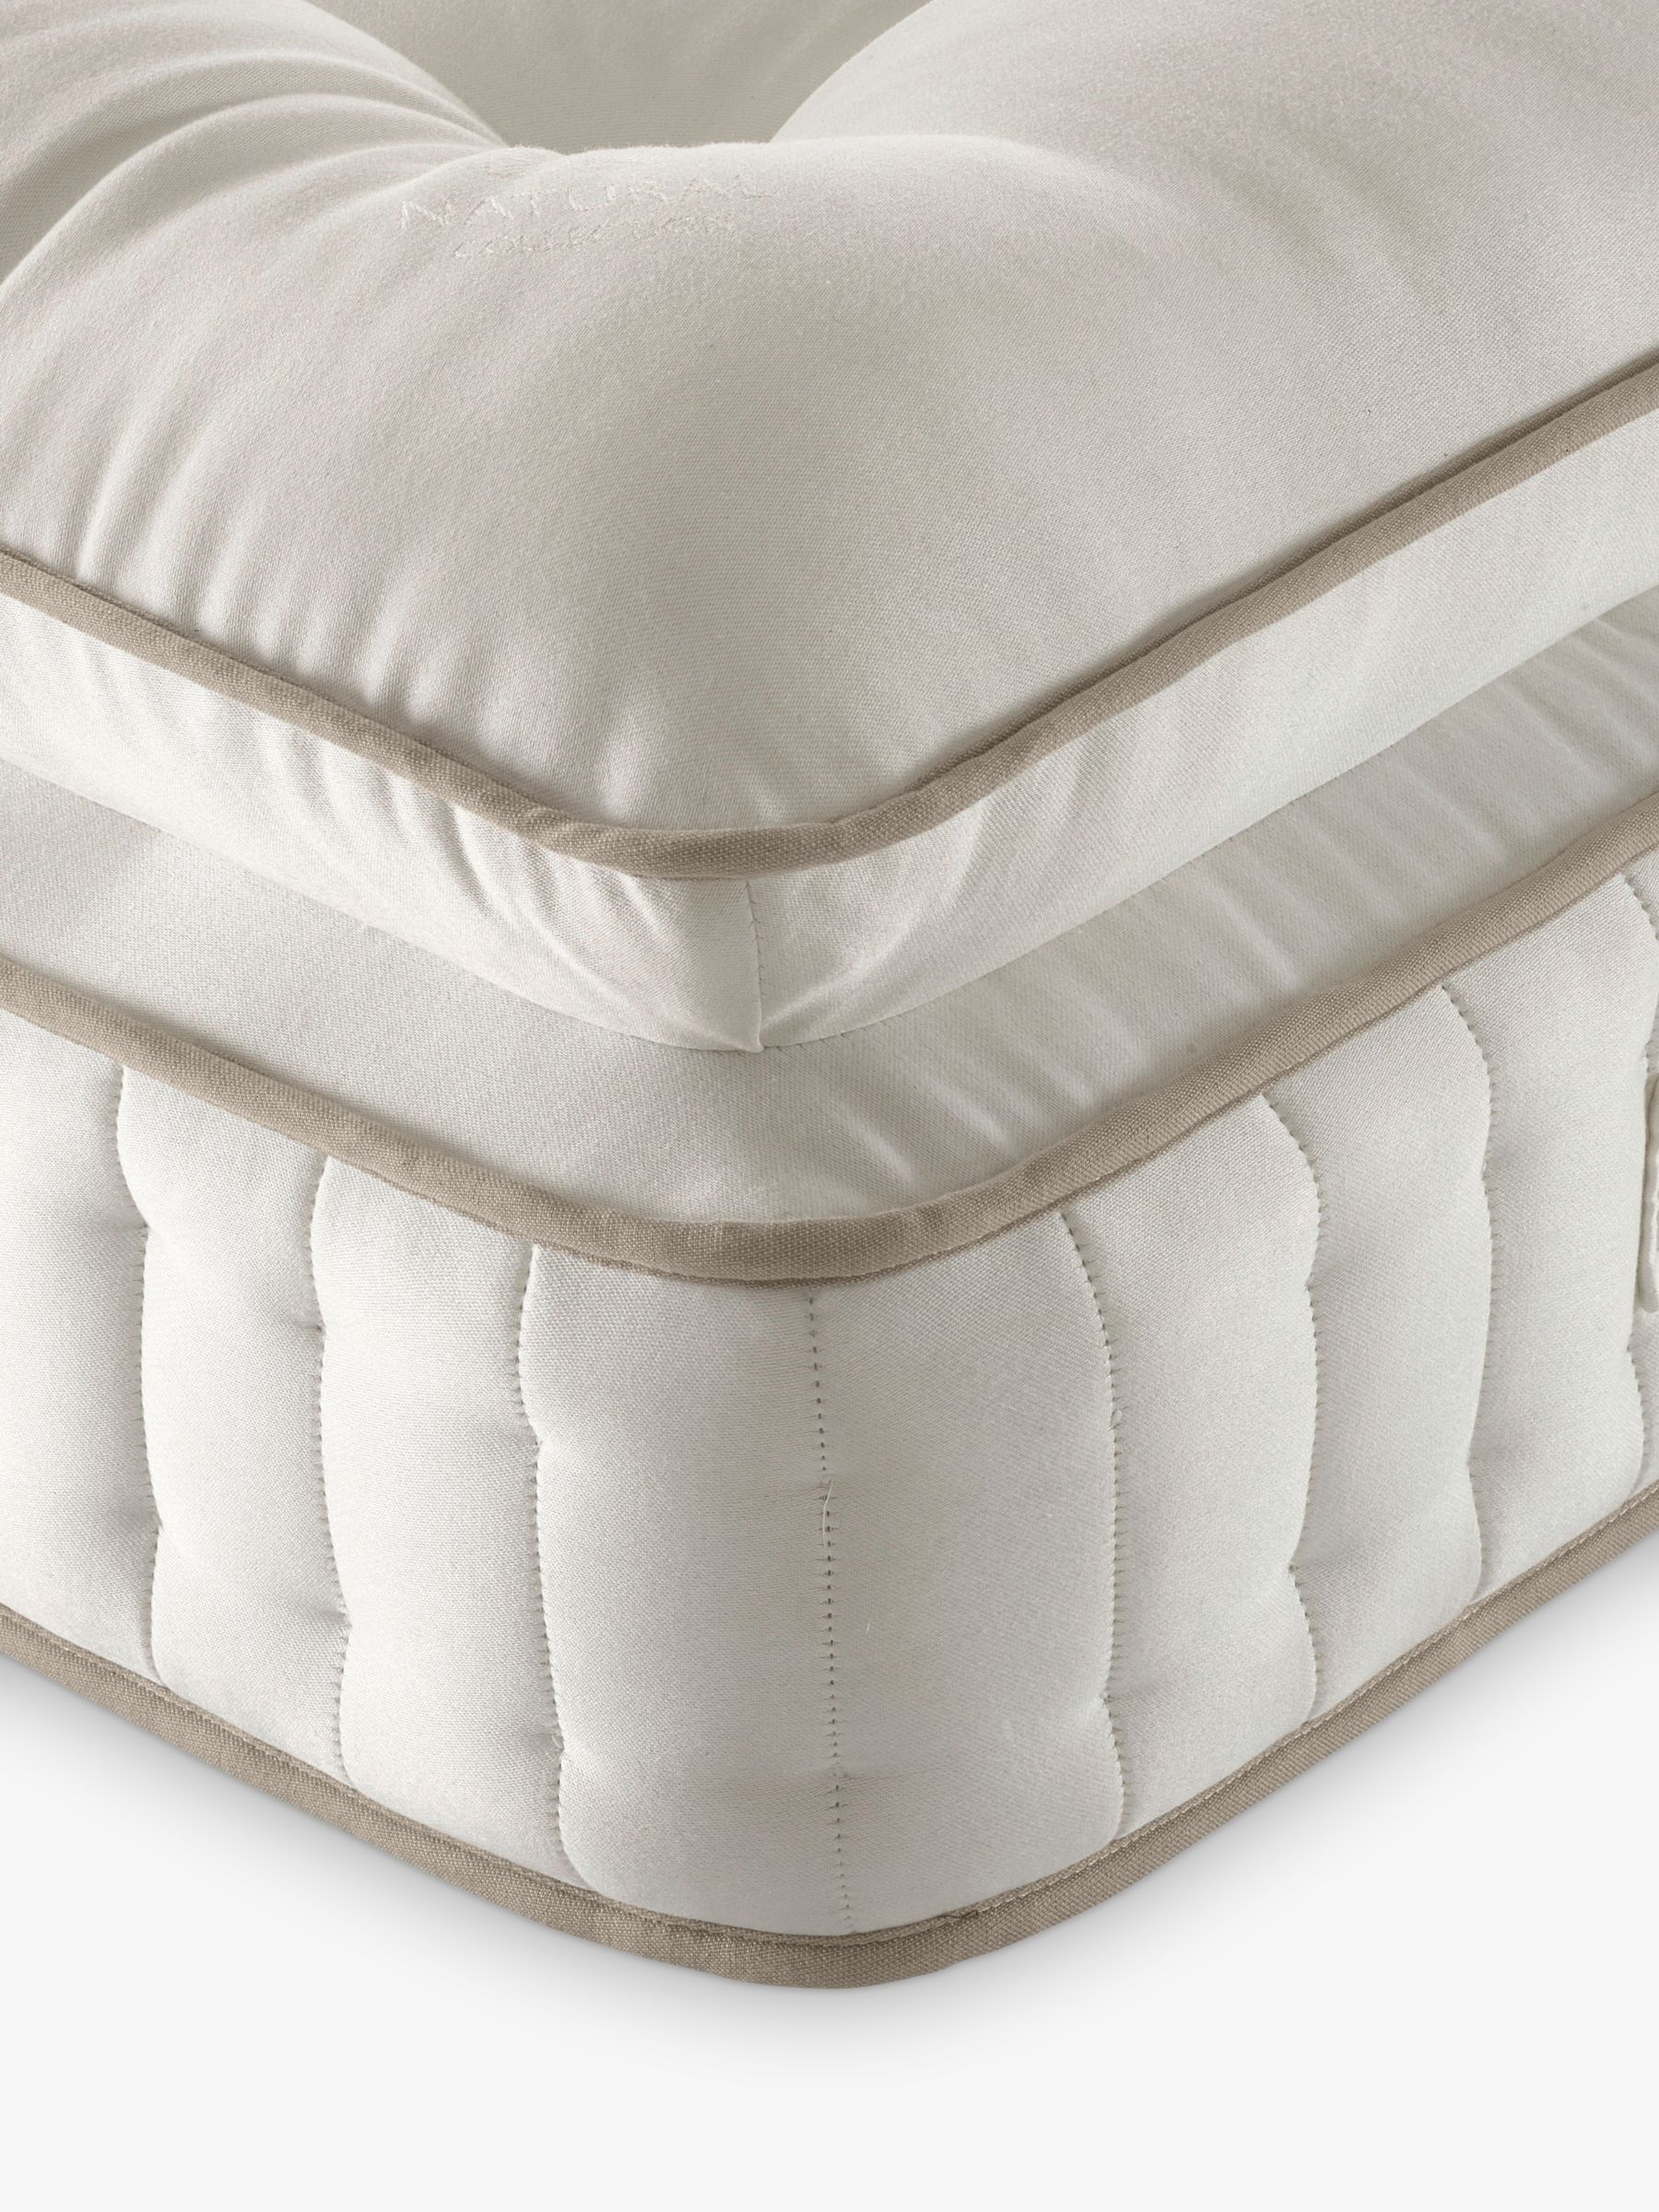 Photo of John lewis luxury natural collection mohair pillowtop 16000 super king size firmer tension pocket spring zip link mattress